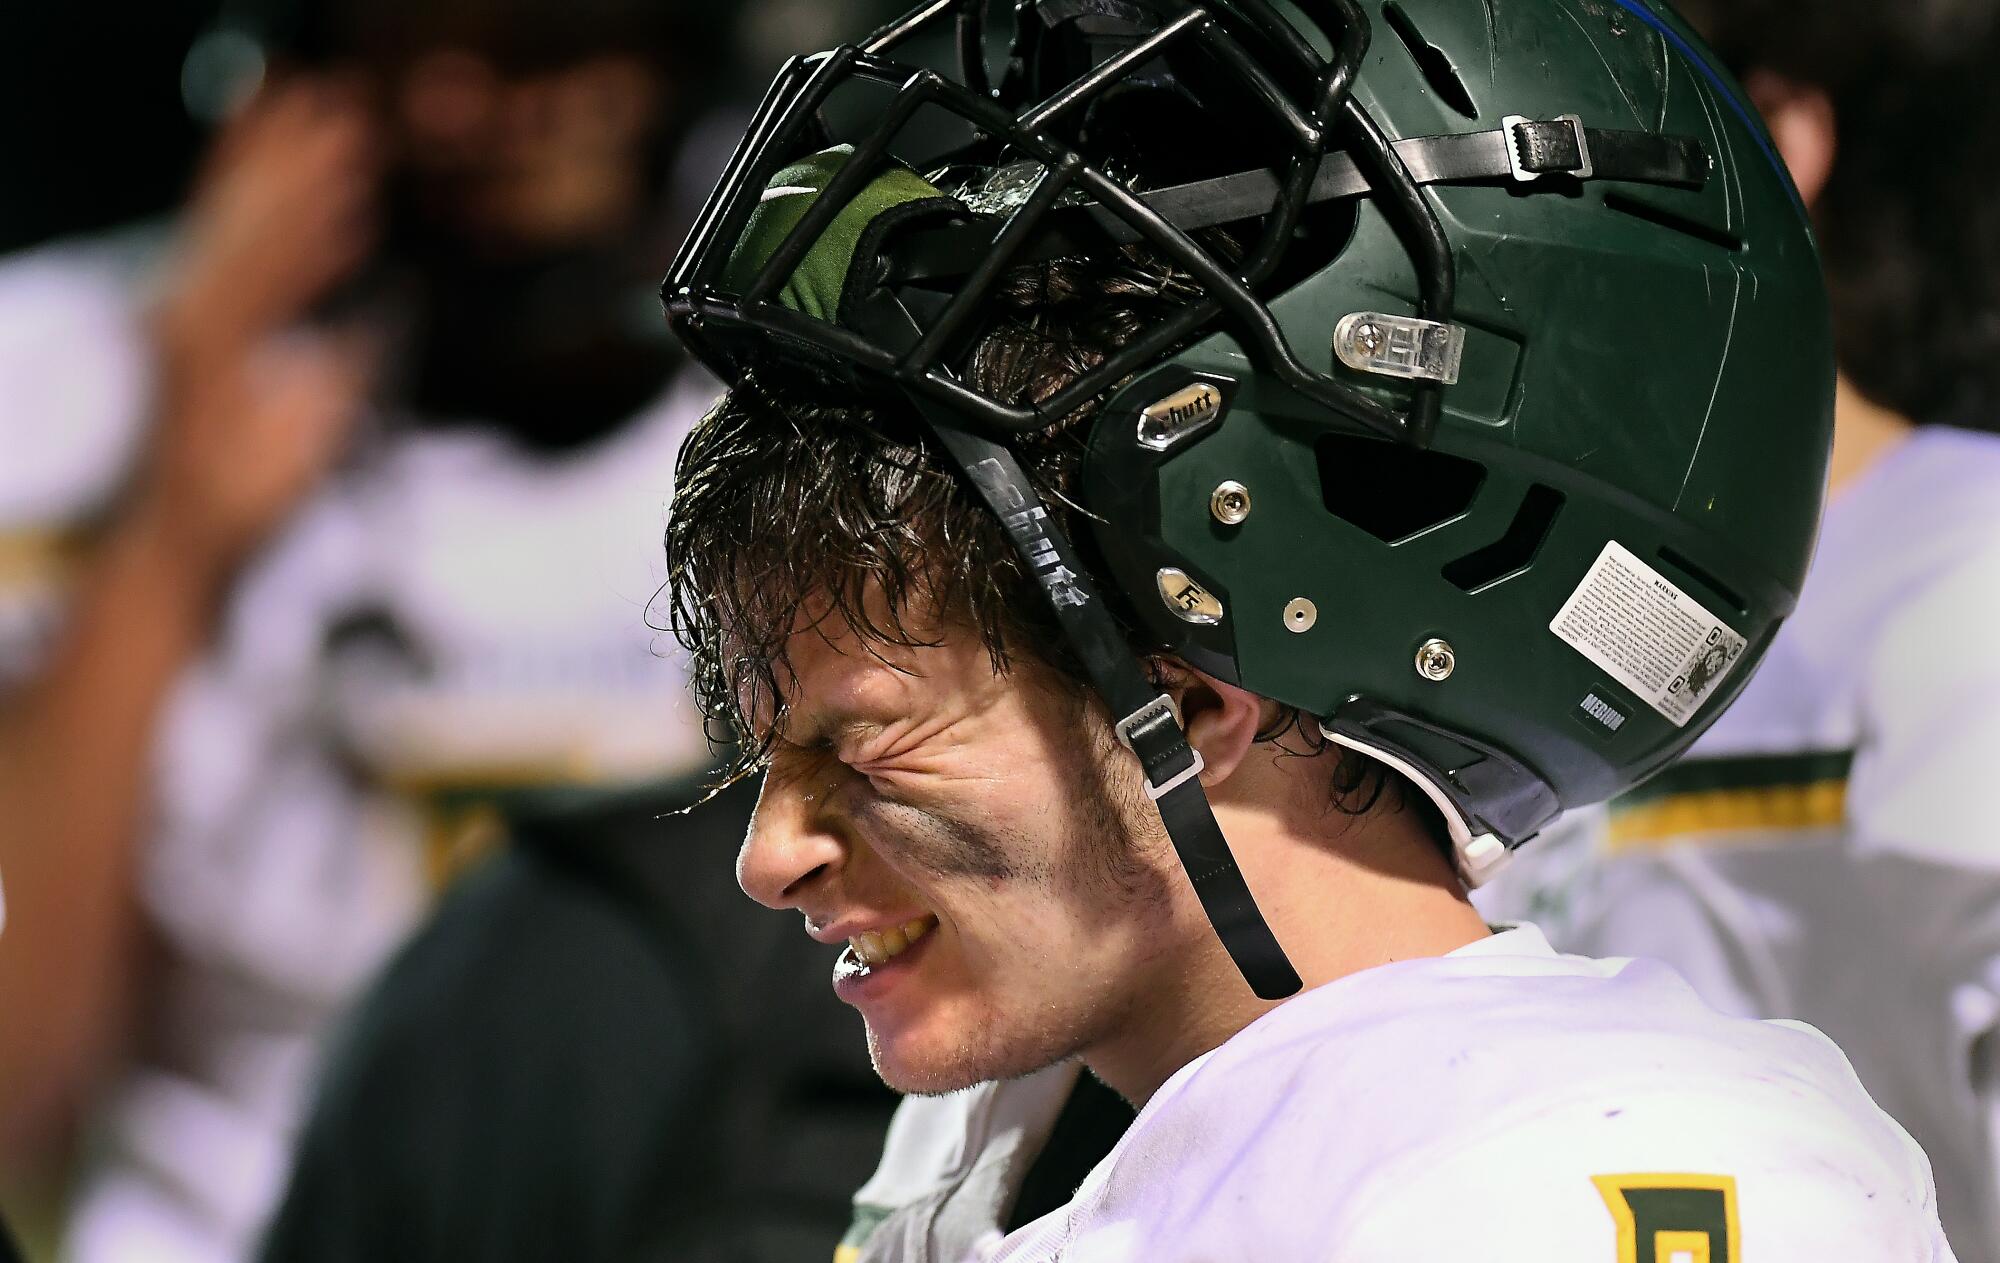 Paradise's Brenden Moon grimaces during a timeout against West Valley in Cottonwood, Calif., on Nov. 22.